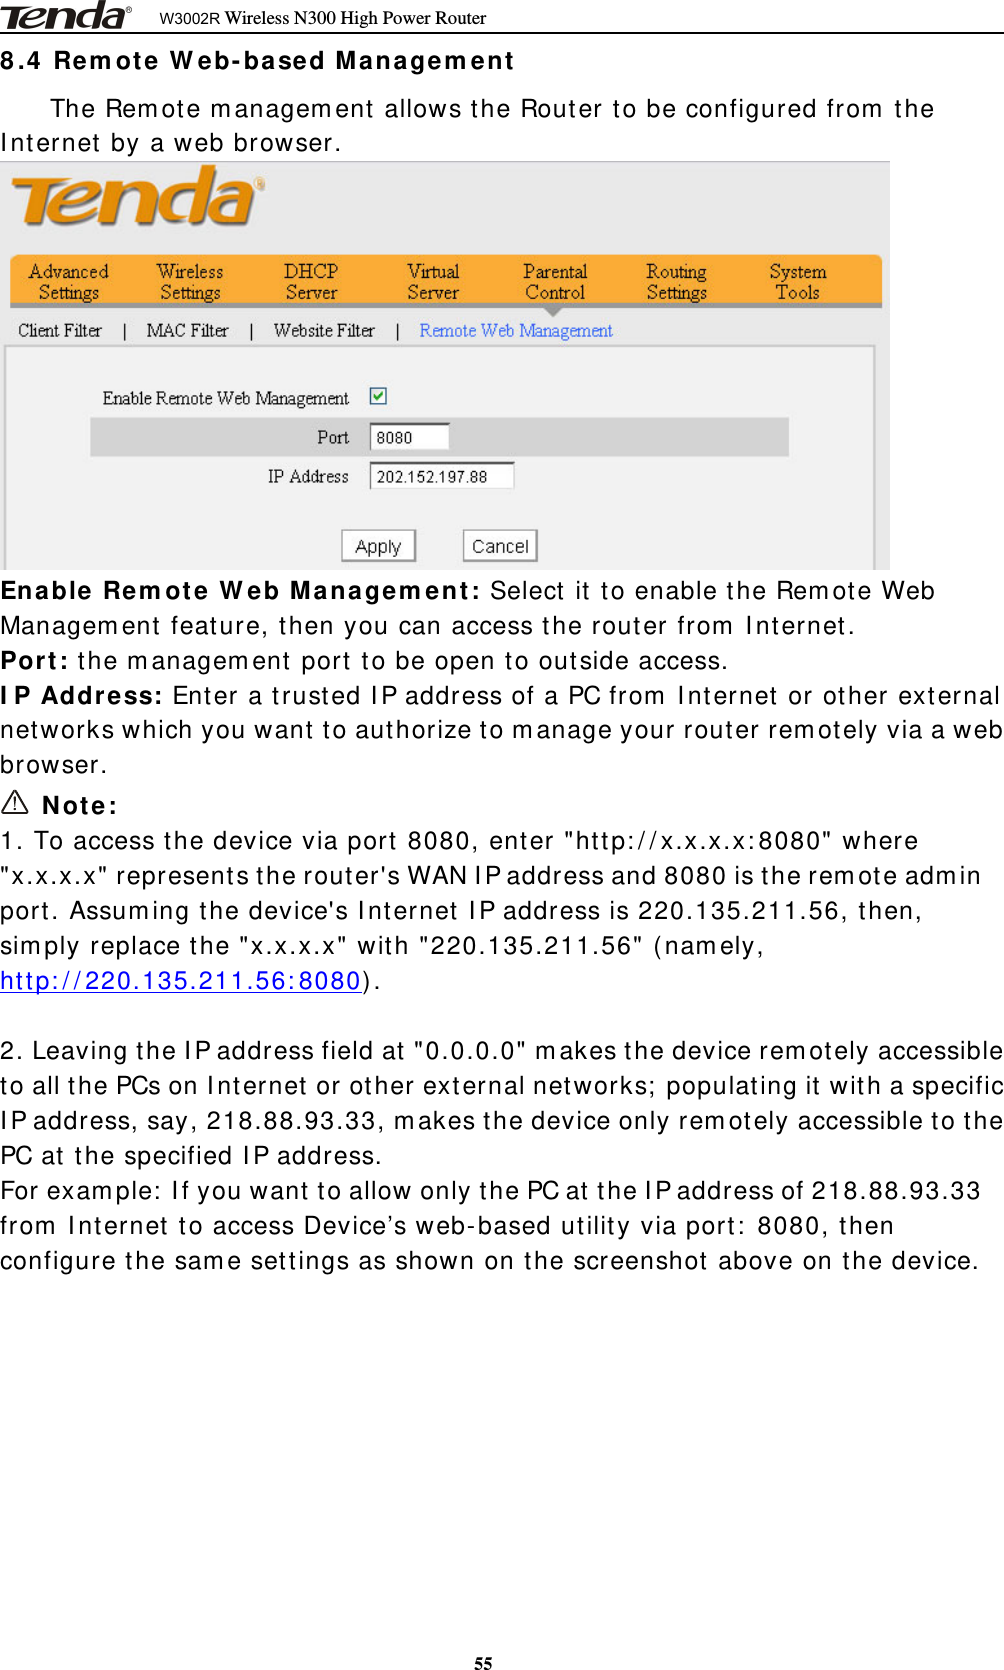 W3002R Wireless N300 High Power Router558.4 Remote Web-based ManagementTheRemotemanagementallowstheRoutertobeconfiguredfromtheInternet by a web browser.Enable Remote Web Management: Select it to enable the Remote WebManagement feature, then you can access the router from Internet.Port: the management port to be open to outside access.IP Address: Enter a trusted IP address of a PC from Internet or other externalnetworks which you want to authorize to manage your router remotely via a webbrowser.Note:1. To access the device via port 8080, enter &quot;http://x.x.x.x:8080&quot; where&quot;x.x.x.x&quot; represents the router&apos;s WAN IP address and 8080 is the remote adminport. Assuming the device&apos;s Internet IP address is 220.135.211.56, then,simply replace the &quot;x.x.x.x&quot; with &quot;220.135.211.56&quot; (namely,http://220.135.211.56:8080).2. Leaving the IP address field at &quot;0.0.0.0&quot; makes the device remotely accessibleto all the PCs on Internet or other external networks; populating it with a specificIP address, say, 218.88.93.33, makes the device only remotely accessible to thePC at the specified IP address.For example: If you want to allow only the PC at the IP address of 218.88.93.33from Internet to access Device’s web-based utility via port: 8080, thenconfigure the same settings as shown on the screenshot above on the device.